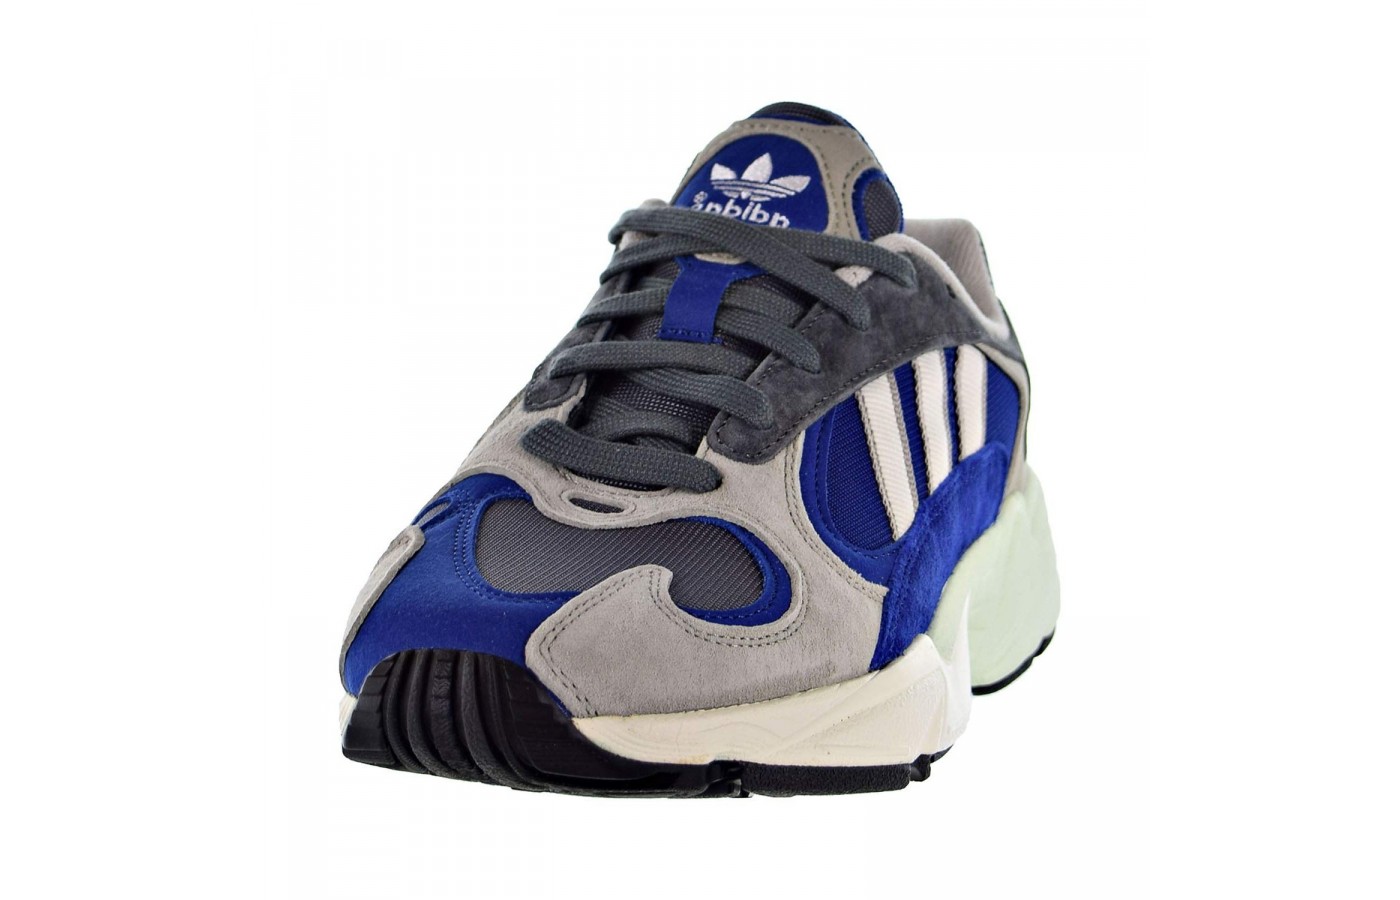 Adidas Yung-1 Reviewed \u0026 Rated in 2020 